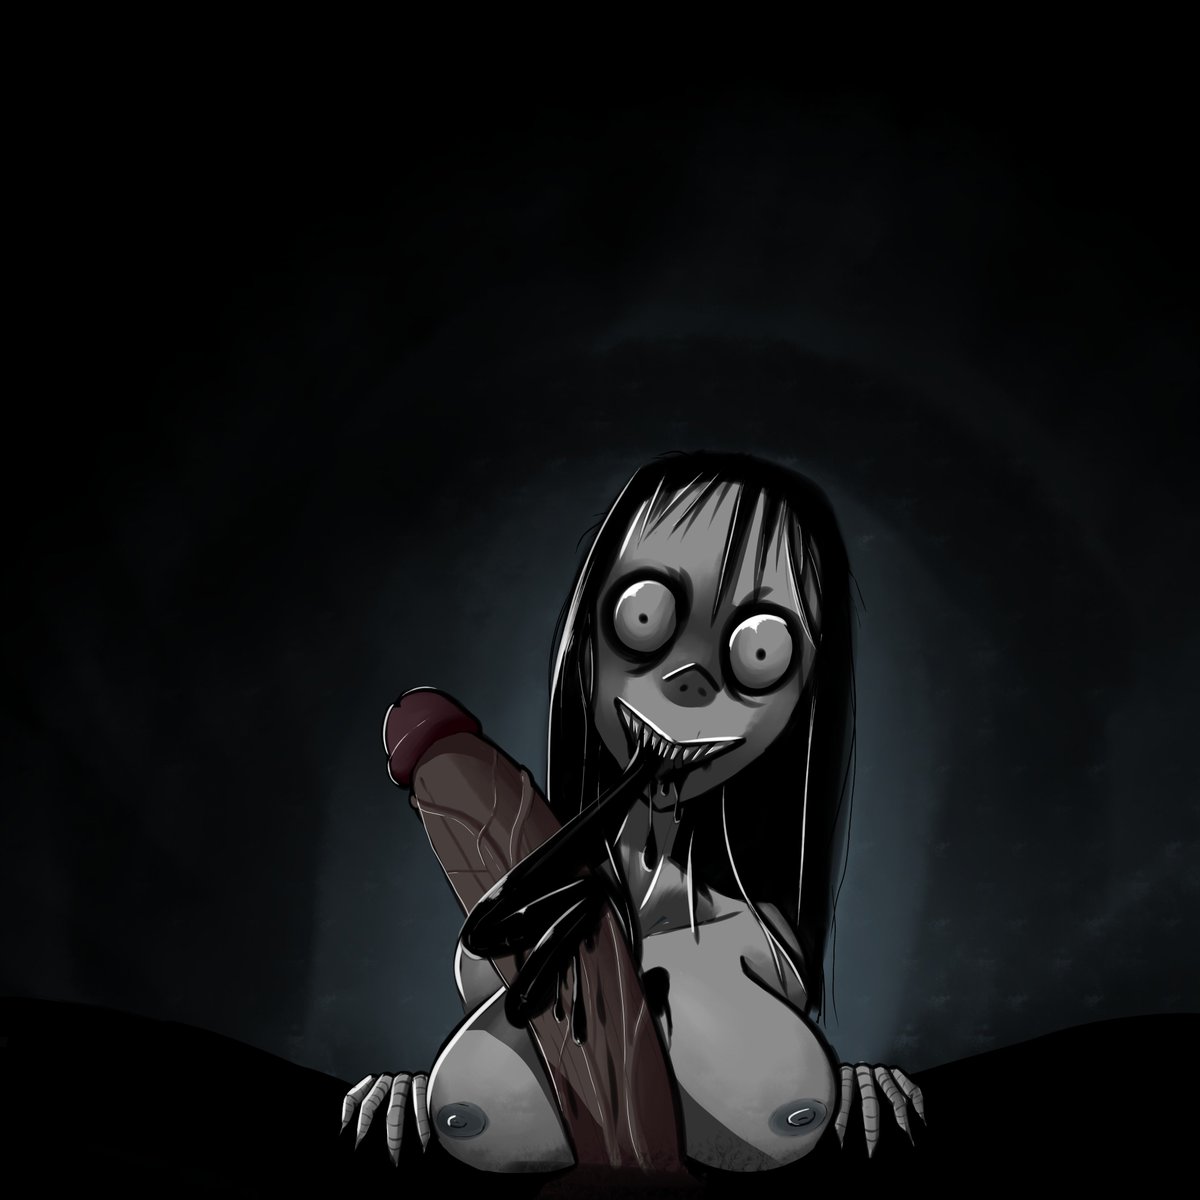 Is anyone else bothered by the lack of creepy Momo lewds All i’ve seen is c...